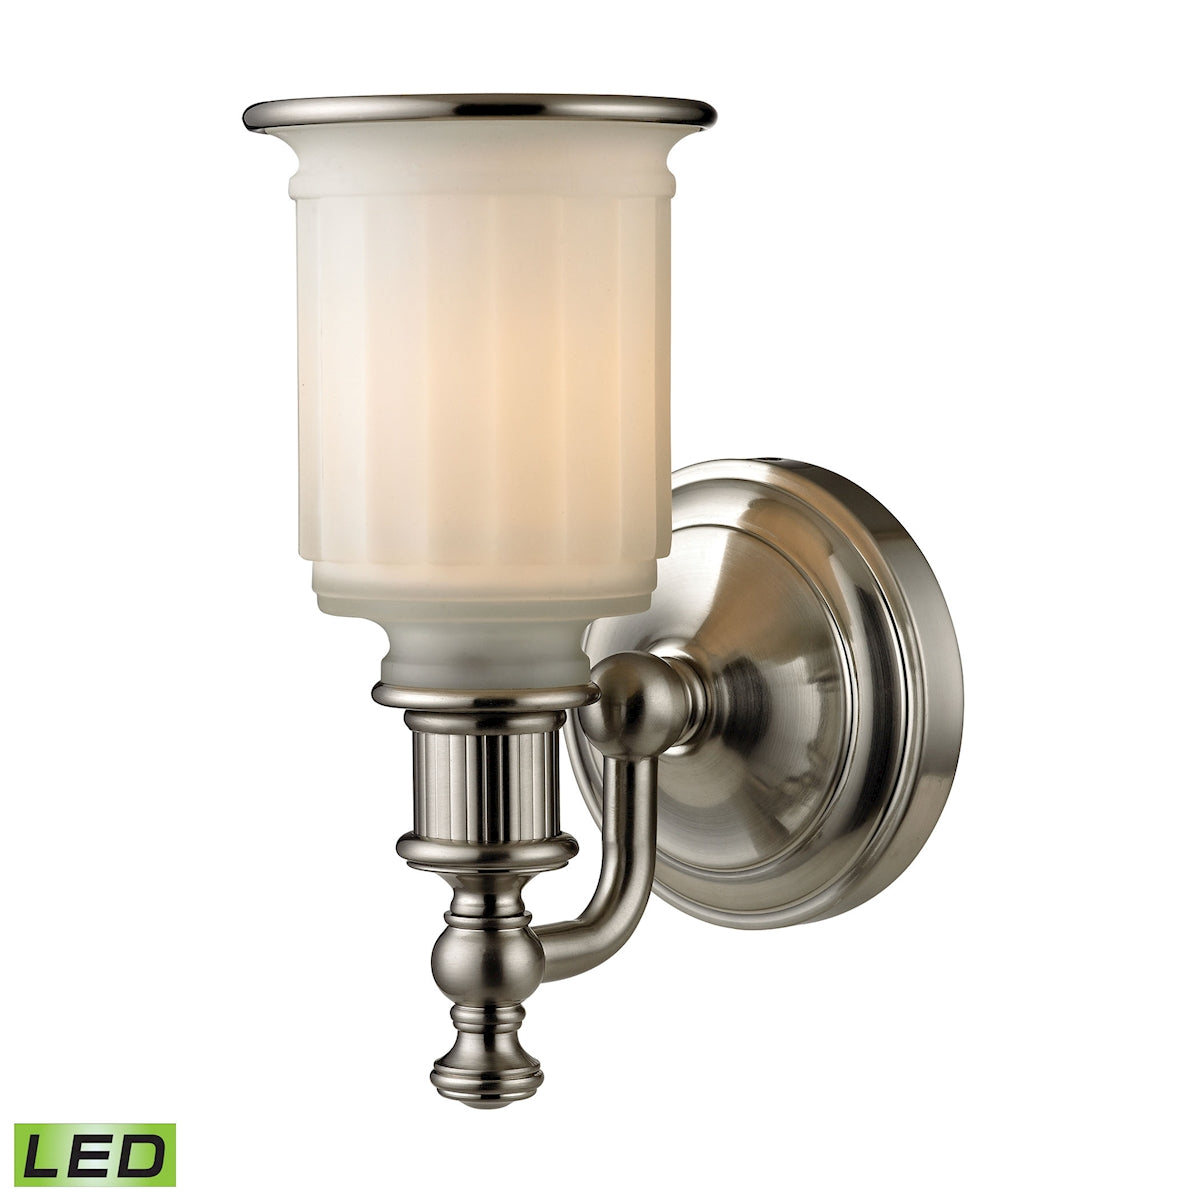 ELK Lighting 52000/1-LED Acadia 1-Light Vanity Lamp in Brushed Nickel with Opal Reeded Pressed Glass - Includes LED Bulb